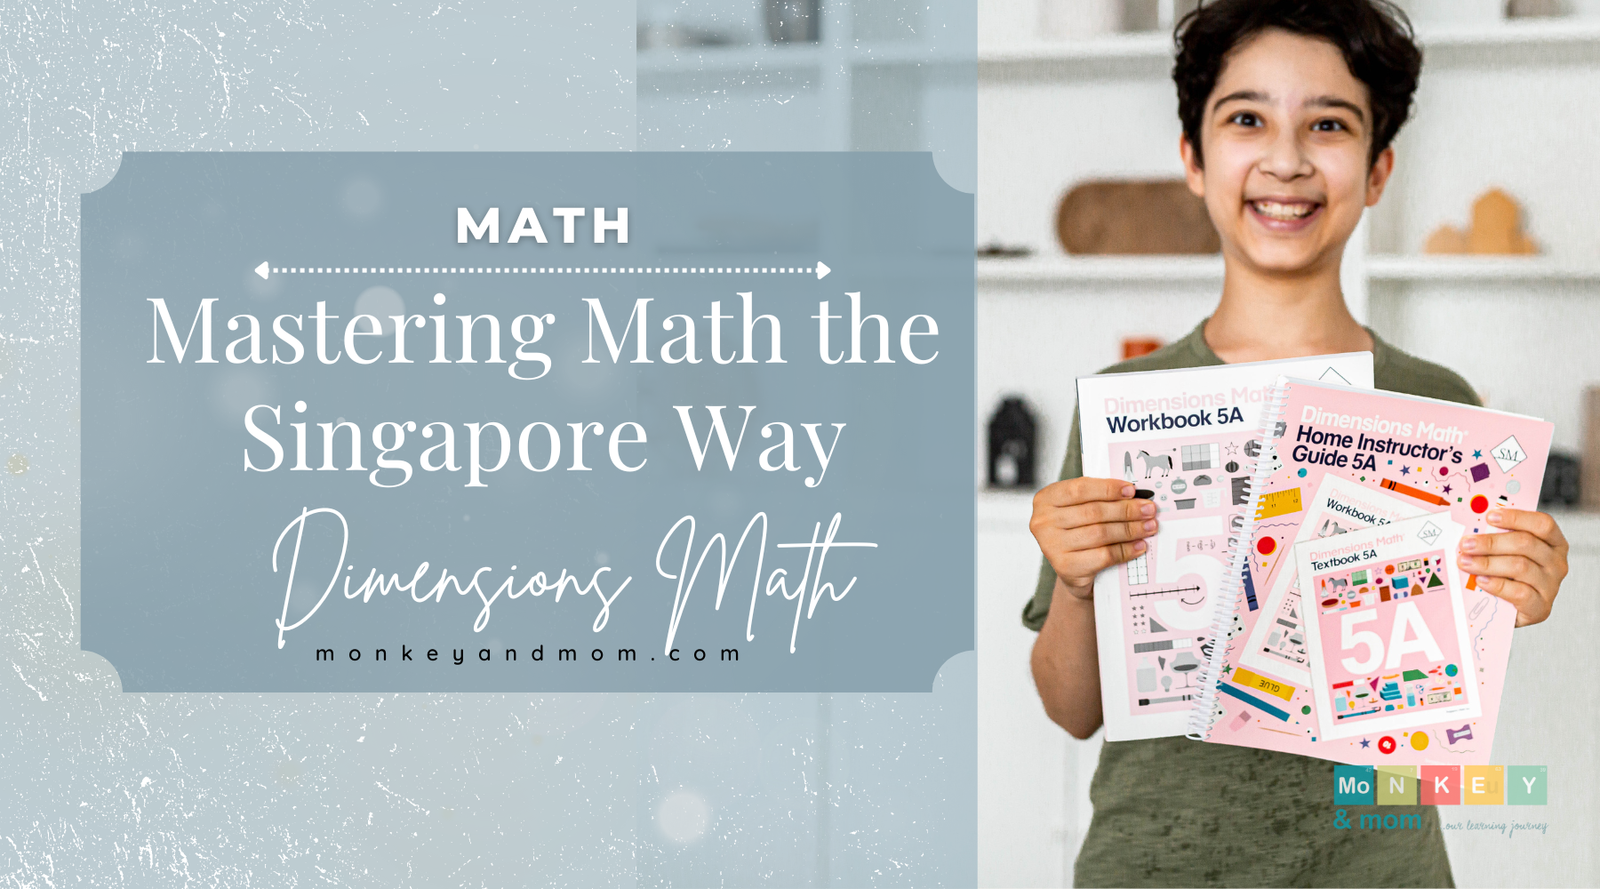 https://monkeyandmom.com/wp-content/uploads/Mastering-Math-the-Singapore-Way-singapore-math-dimensions-learning-.png